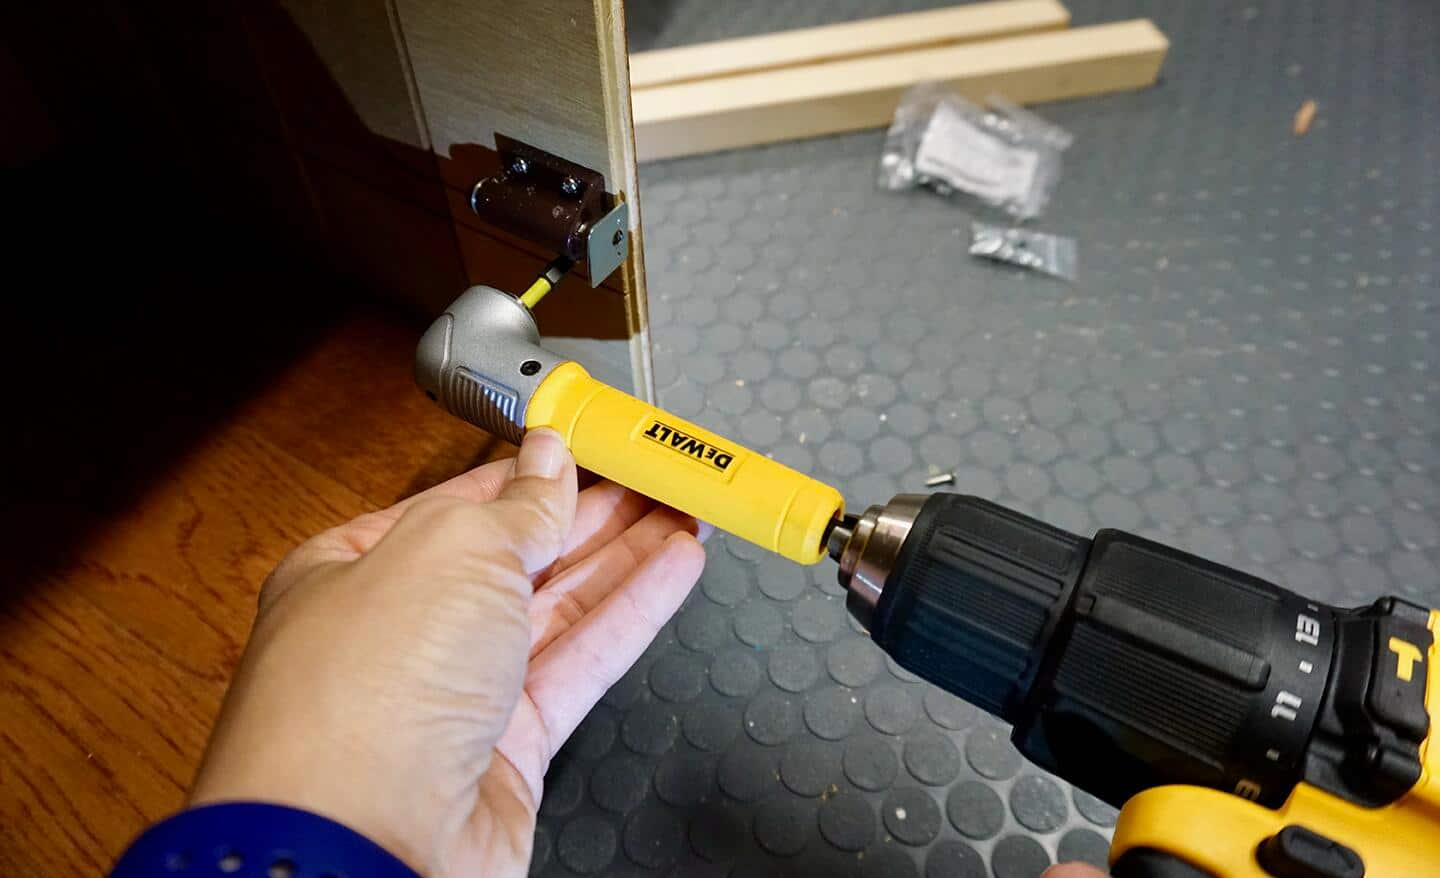 A person attaches a drill bit extender to a drill.